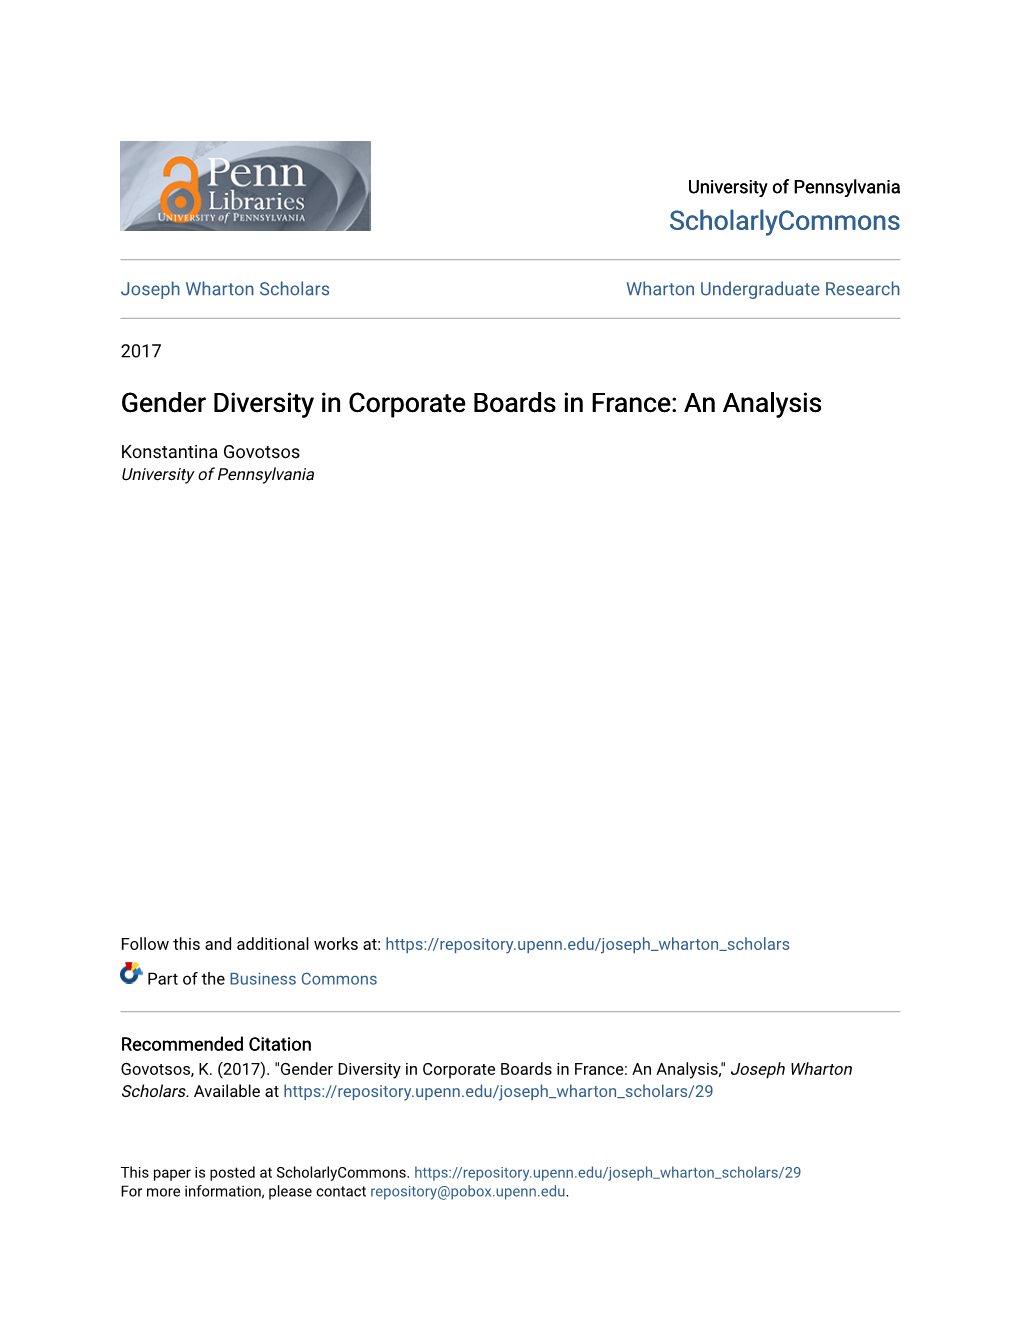 Gender Diversity in Corporate Boards in France: an Analysis